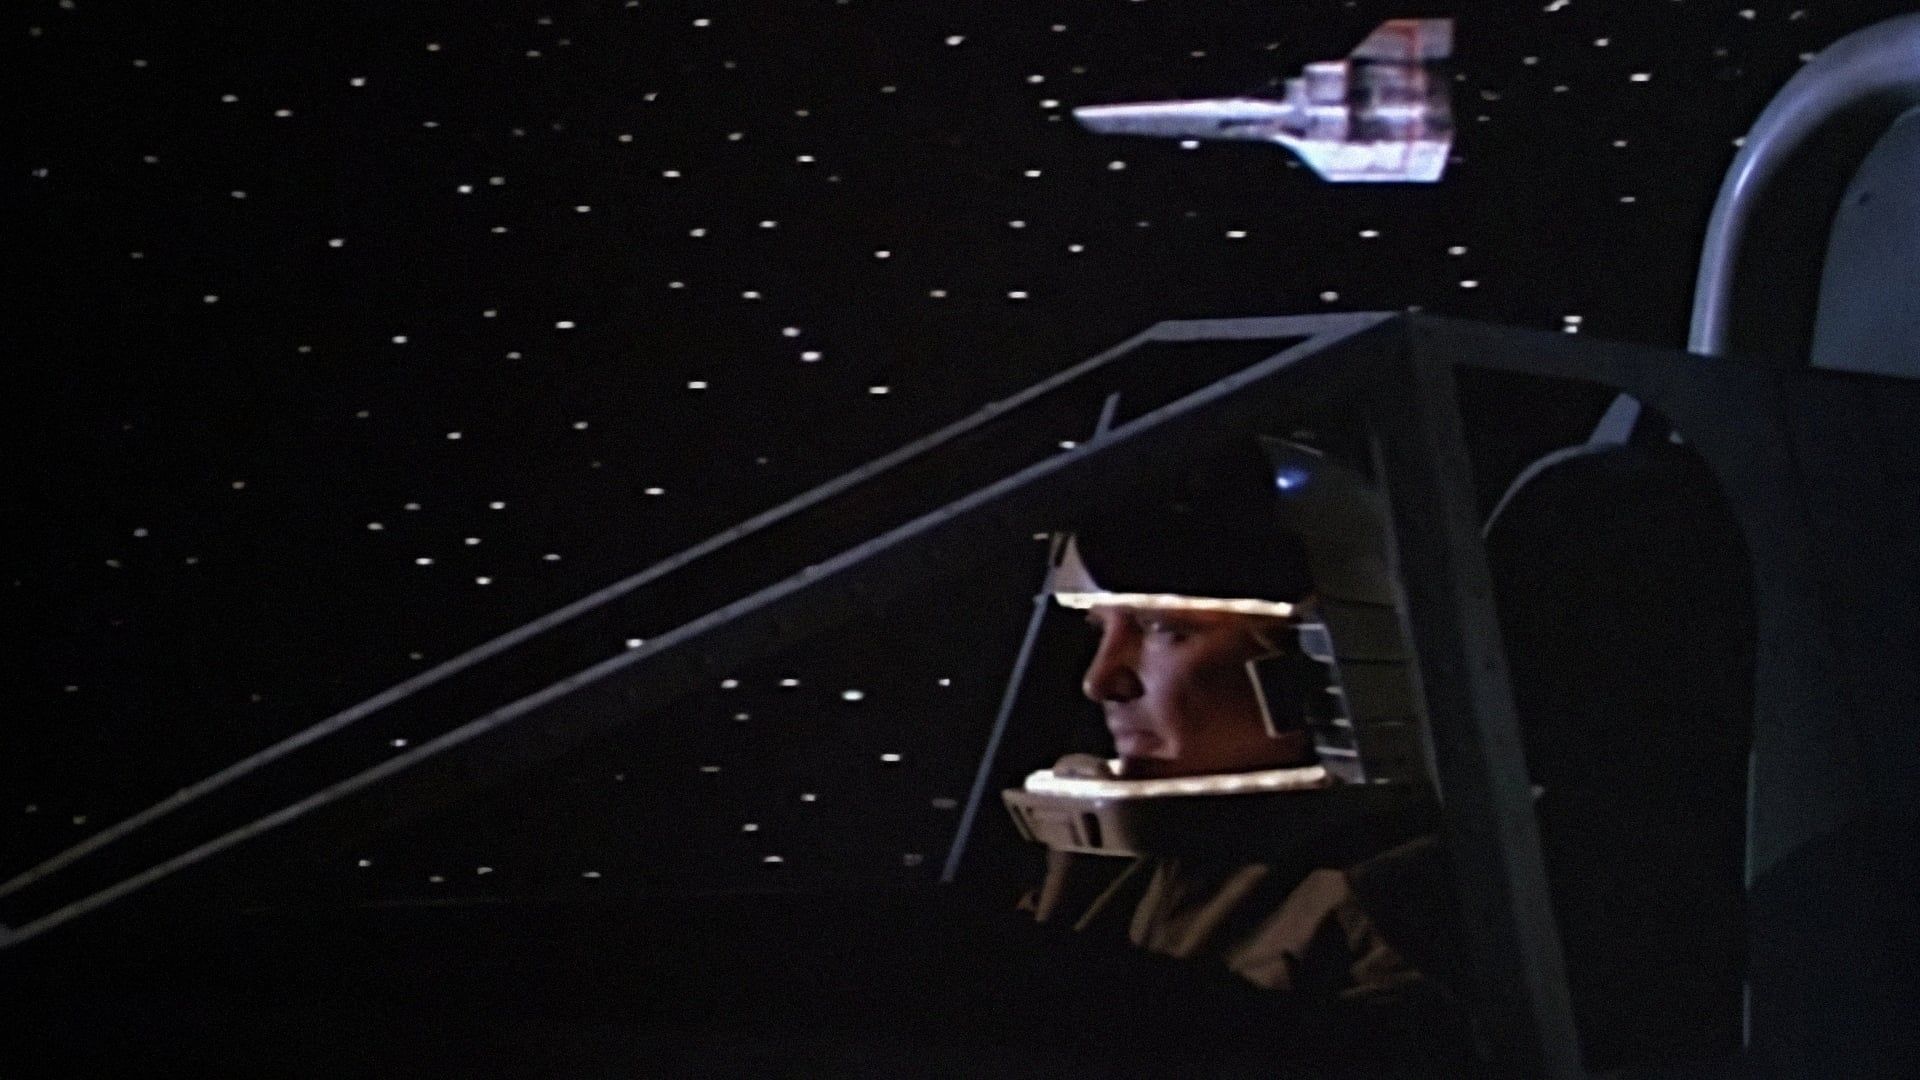 Mission Galactica: The Cylon Attack background